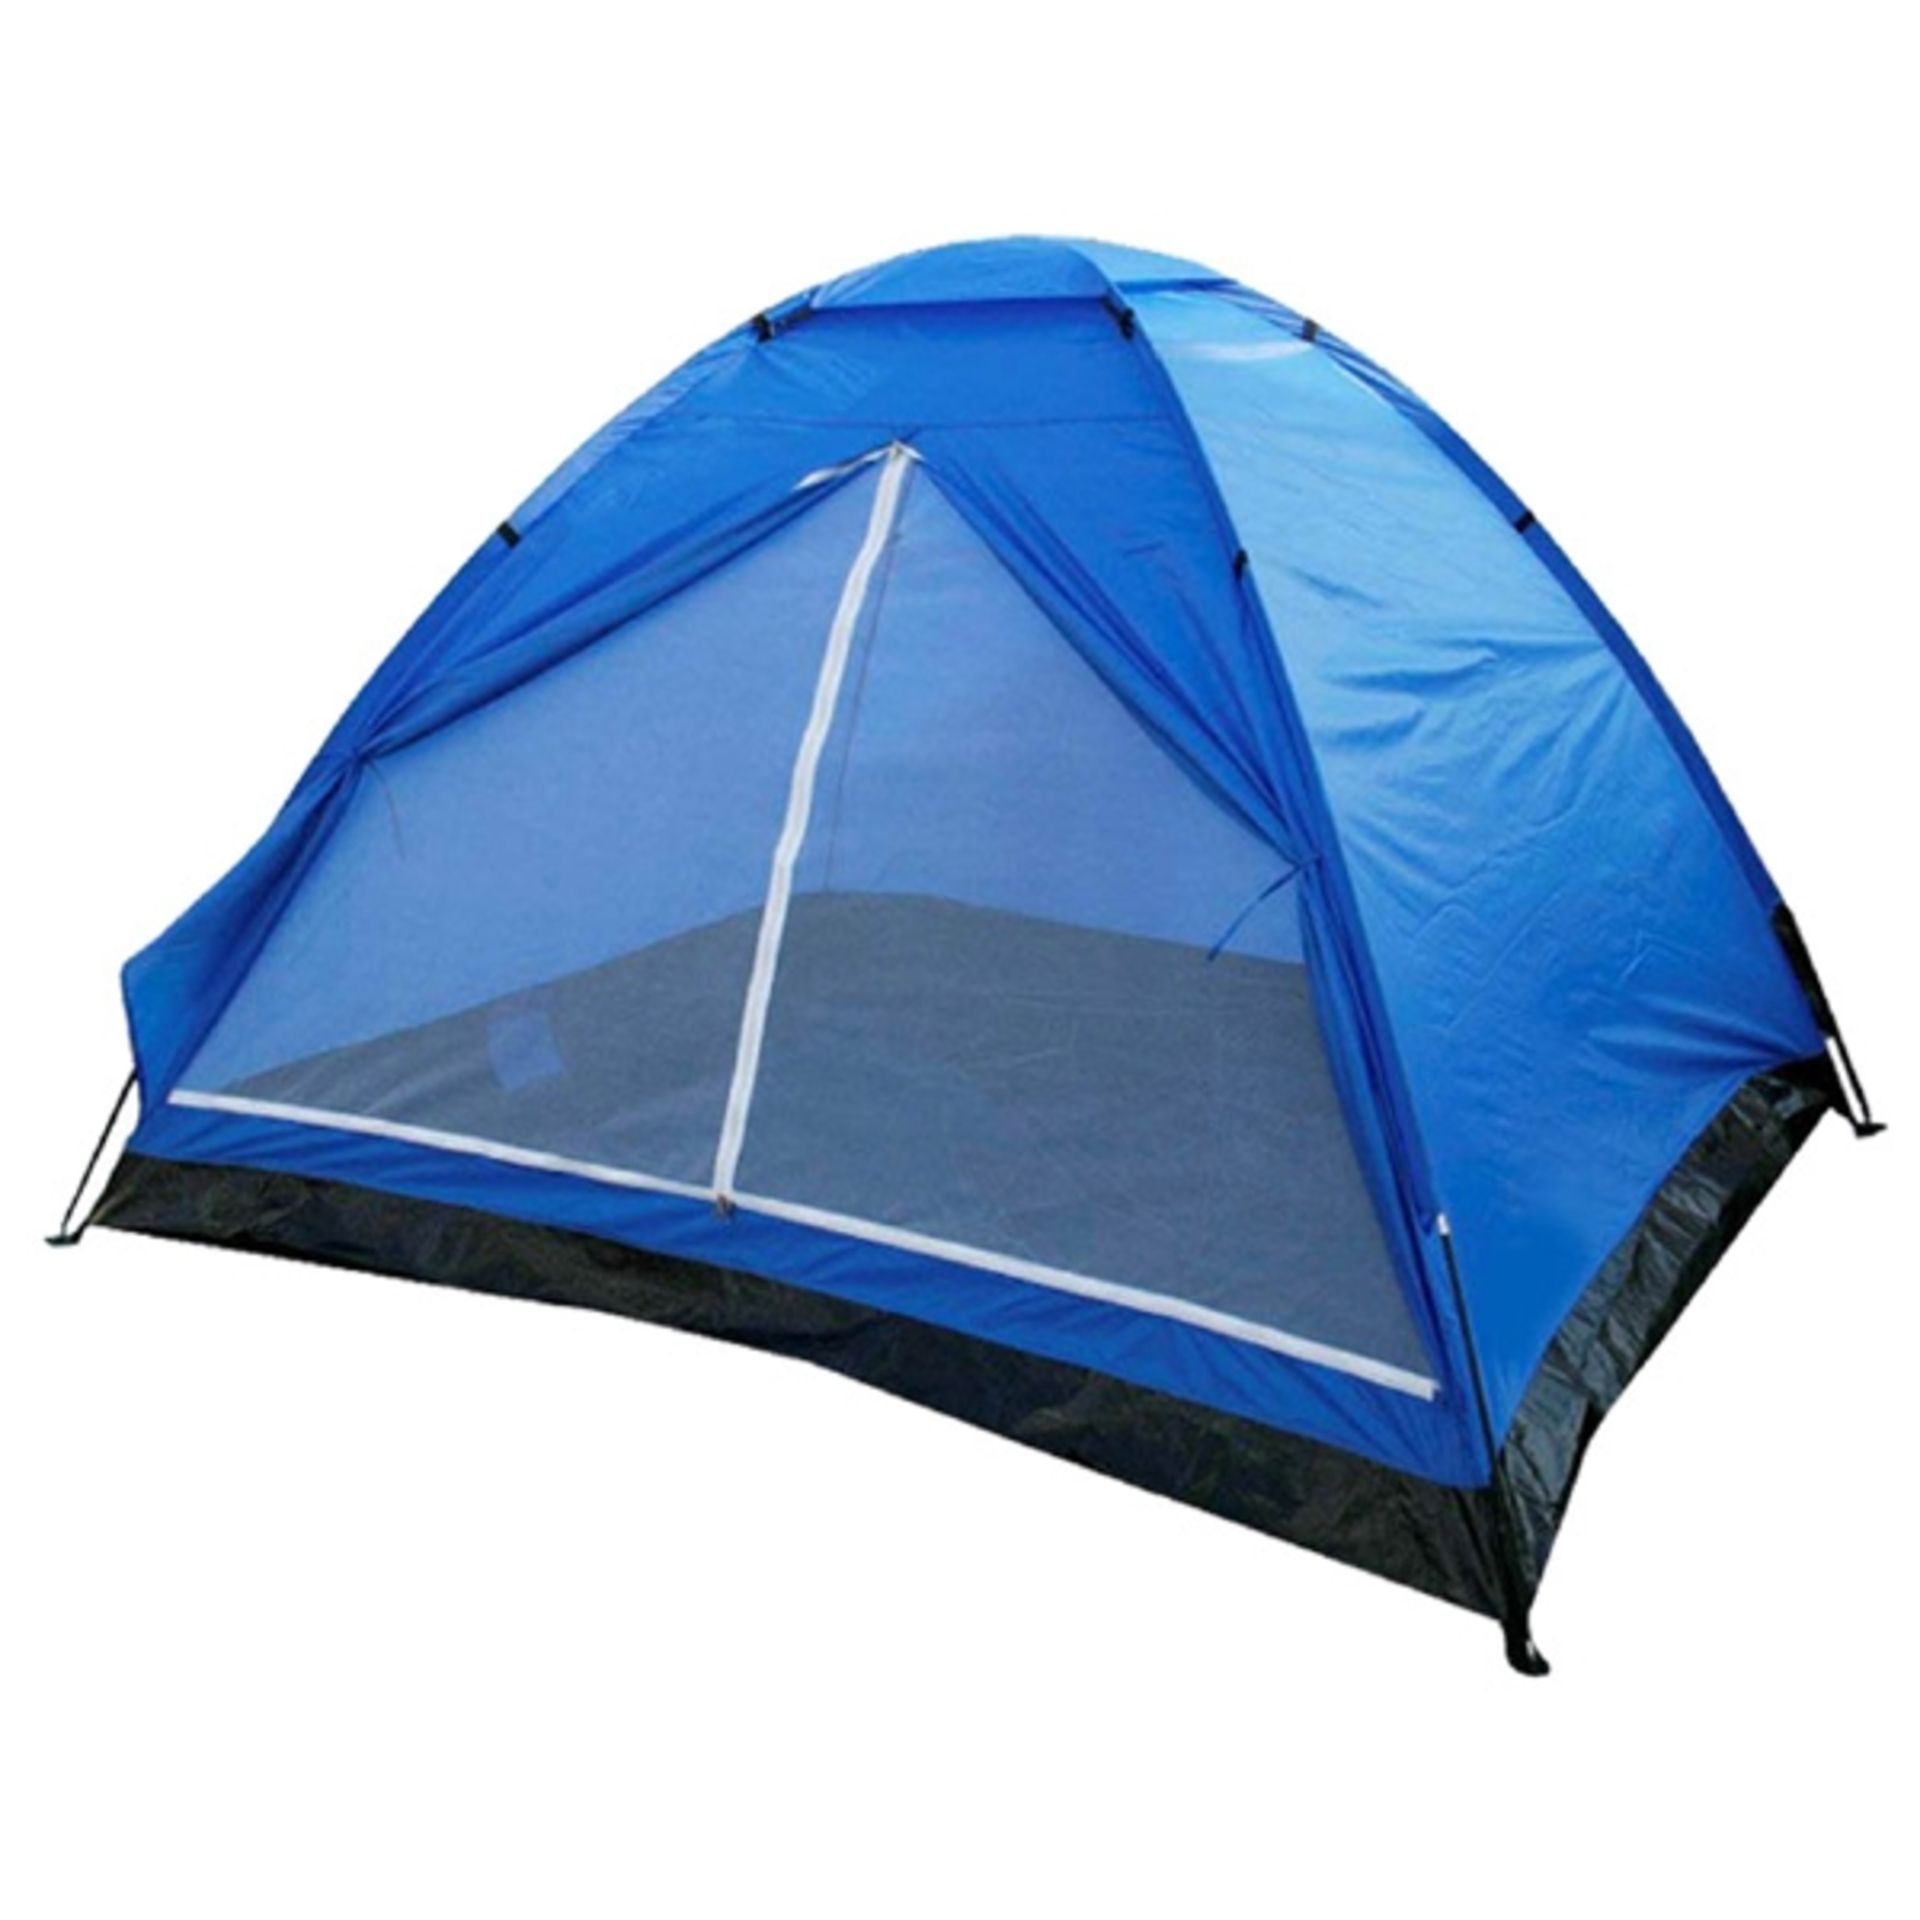 V Two Man Dome Tent In Carry Bag With Fibreglass Poles Built In Ground Sheet X  2  Bid price to be